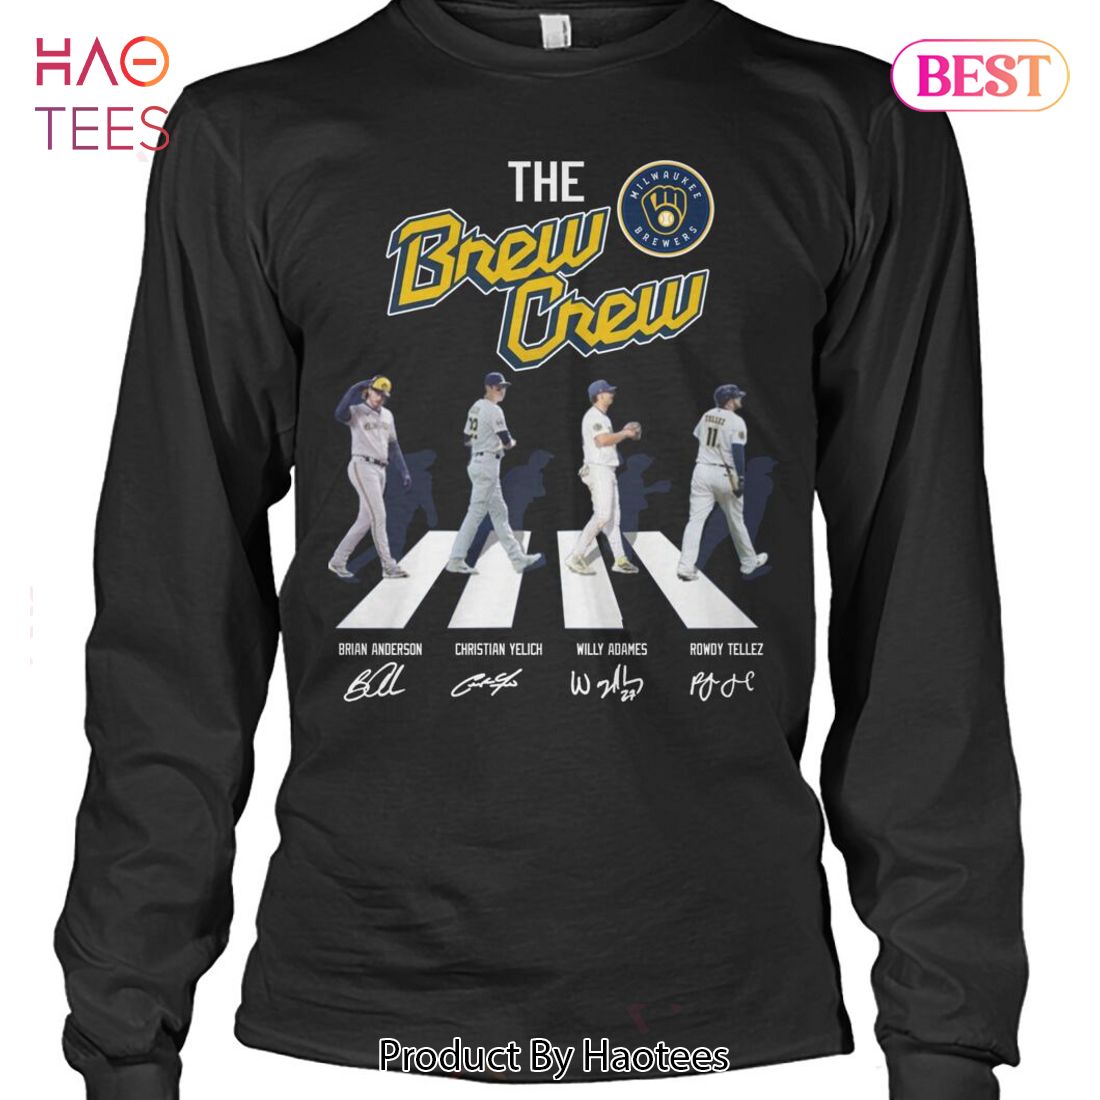 NEW Fashion The Brew Crew Milwaukee Brewers T-Shirt